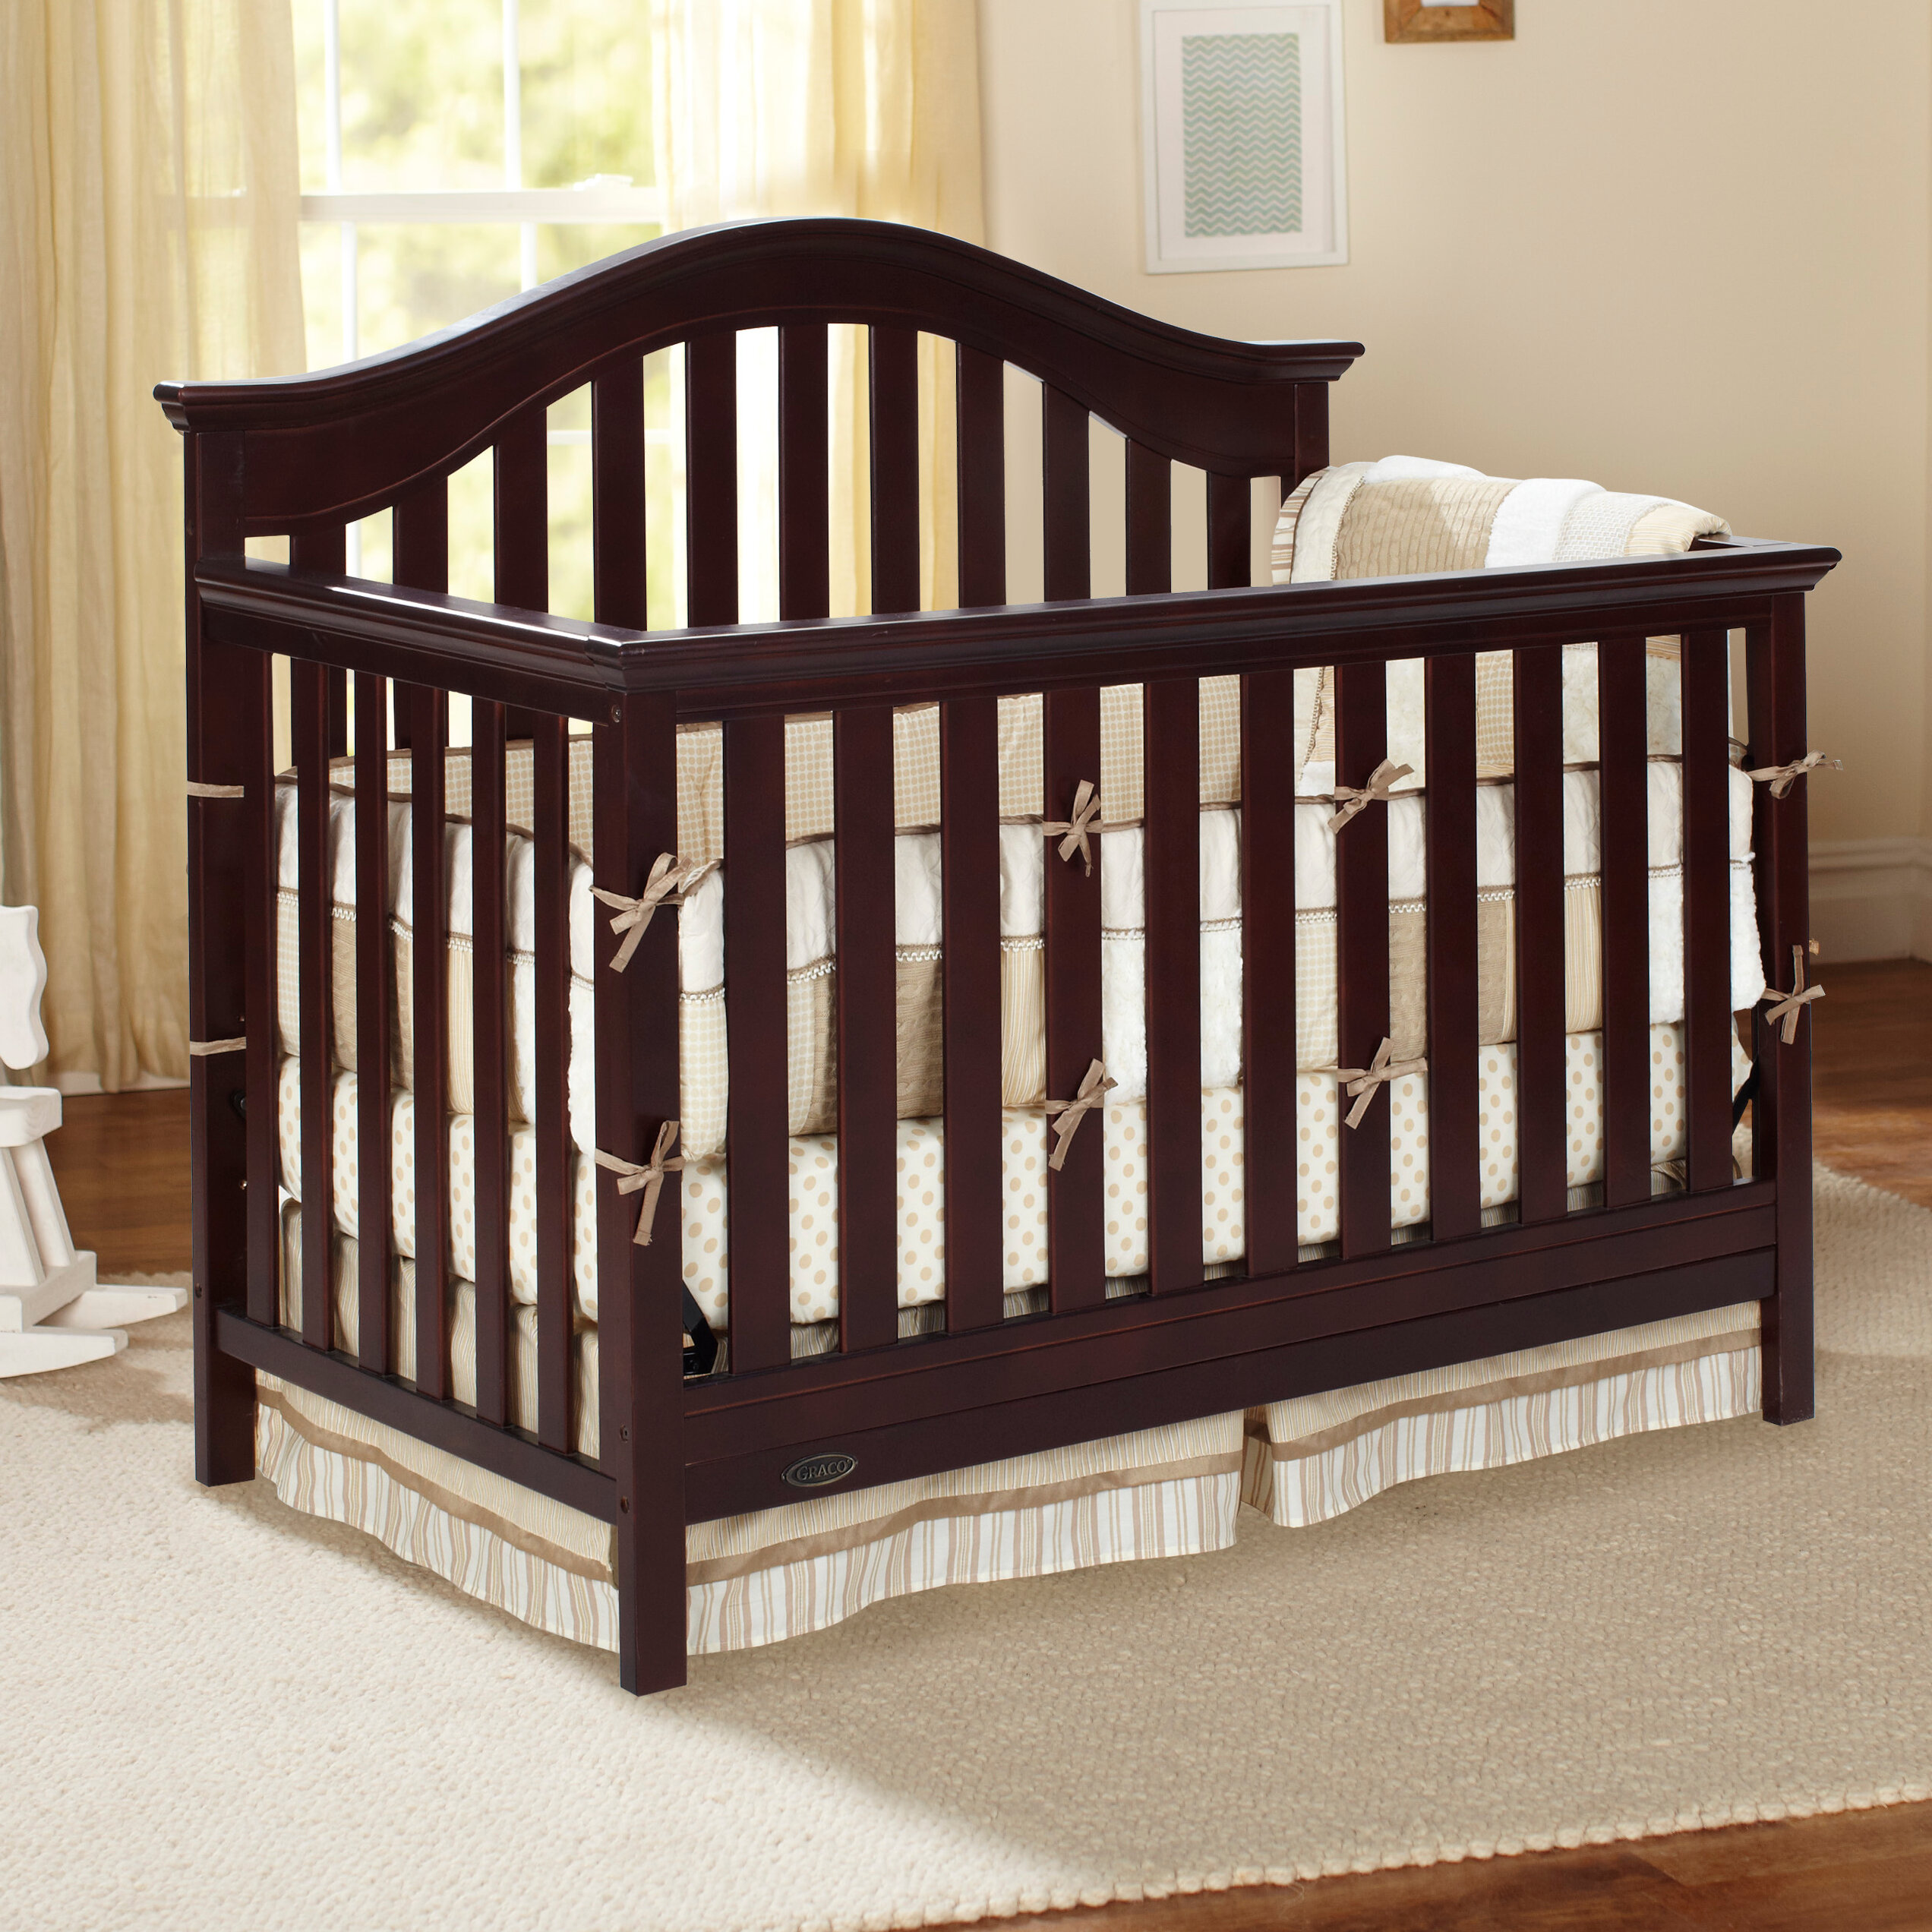 graco convertible bed